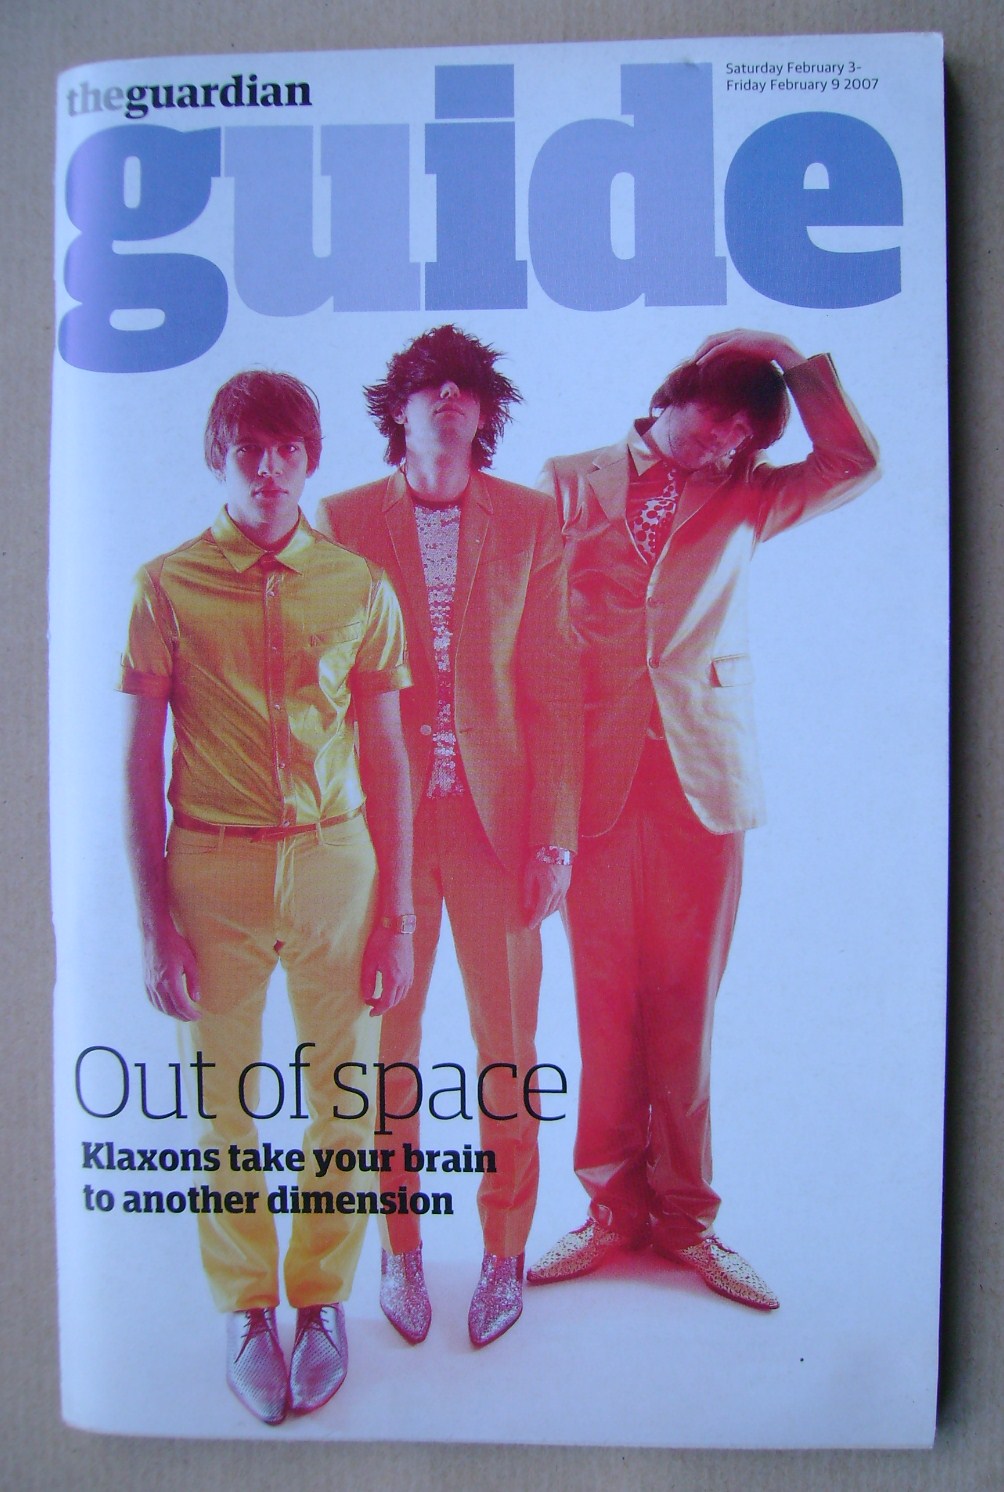 <!--2007-02-03-->The Guardian Guide magazine - Klaxons cover (3 February 20